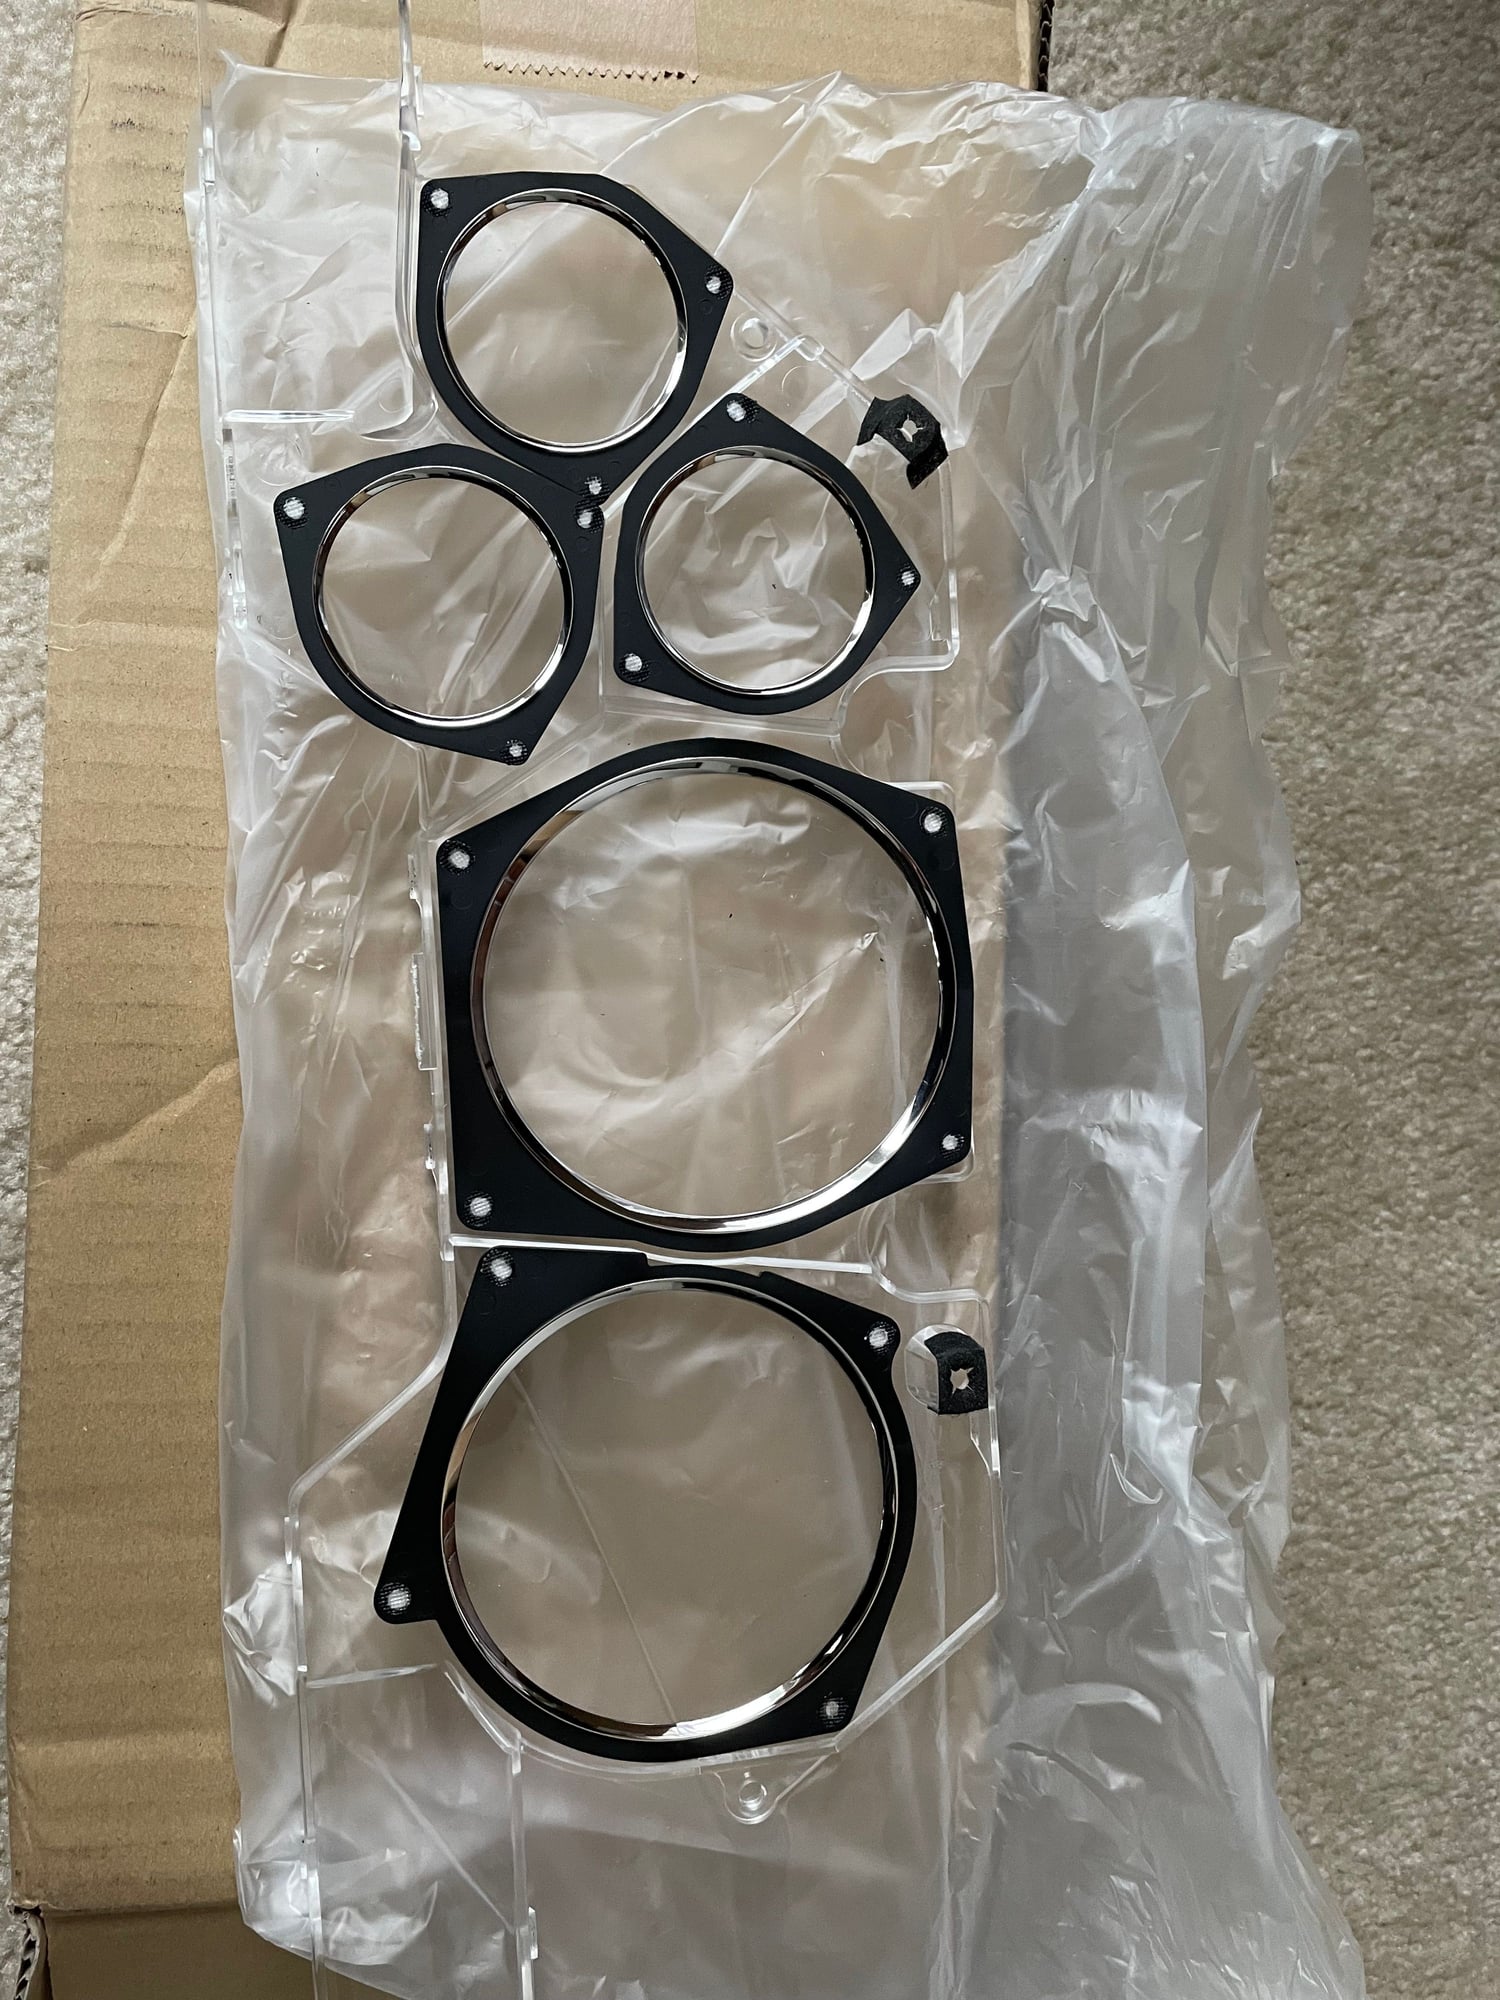 Interior/Upholstery - FD Brand New OEM Cluster Lens FD01-55-447A - New - 1992 to 2002 Mazda RX-7 - Aldie, VA 20105, United States